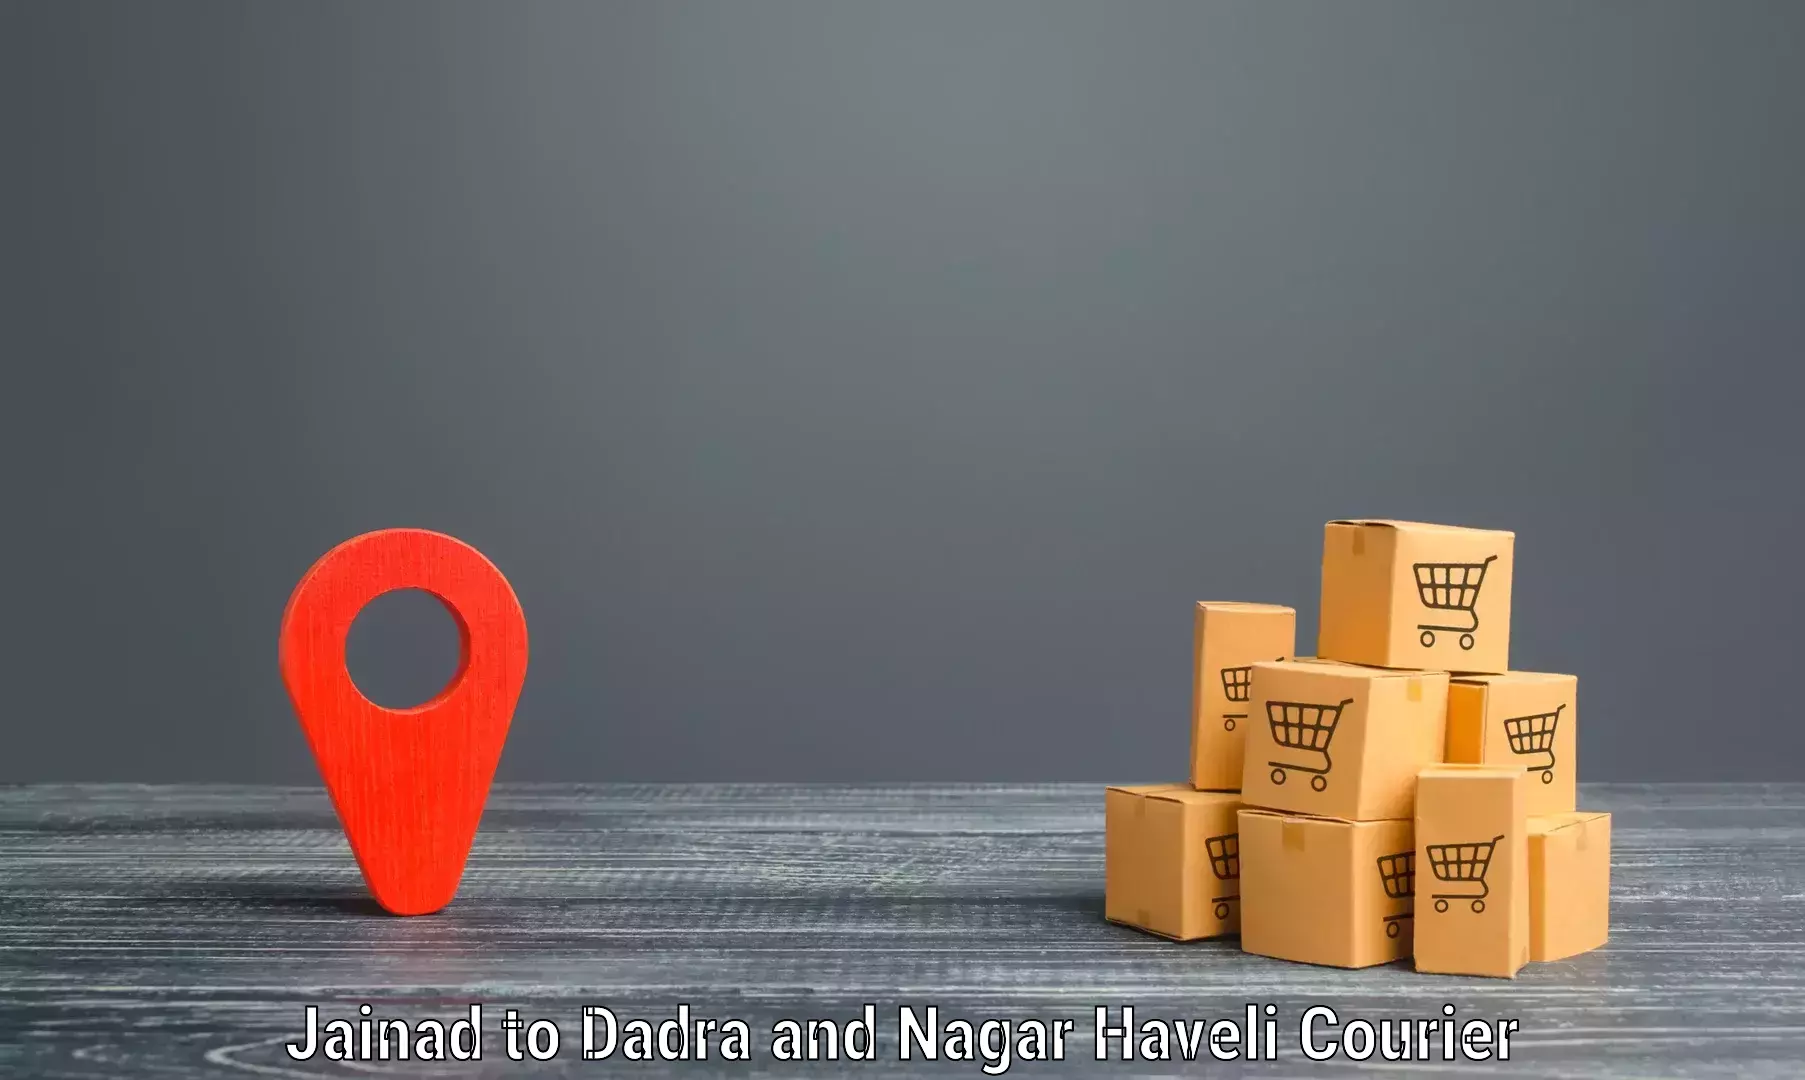 Global freight services in Jainad to Dadra and Nagar Haveli